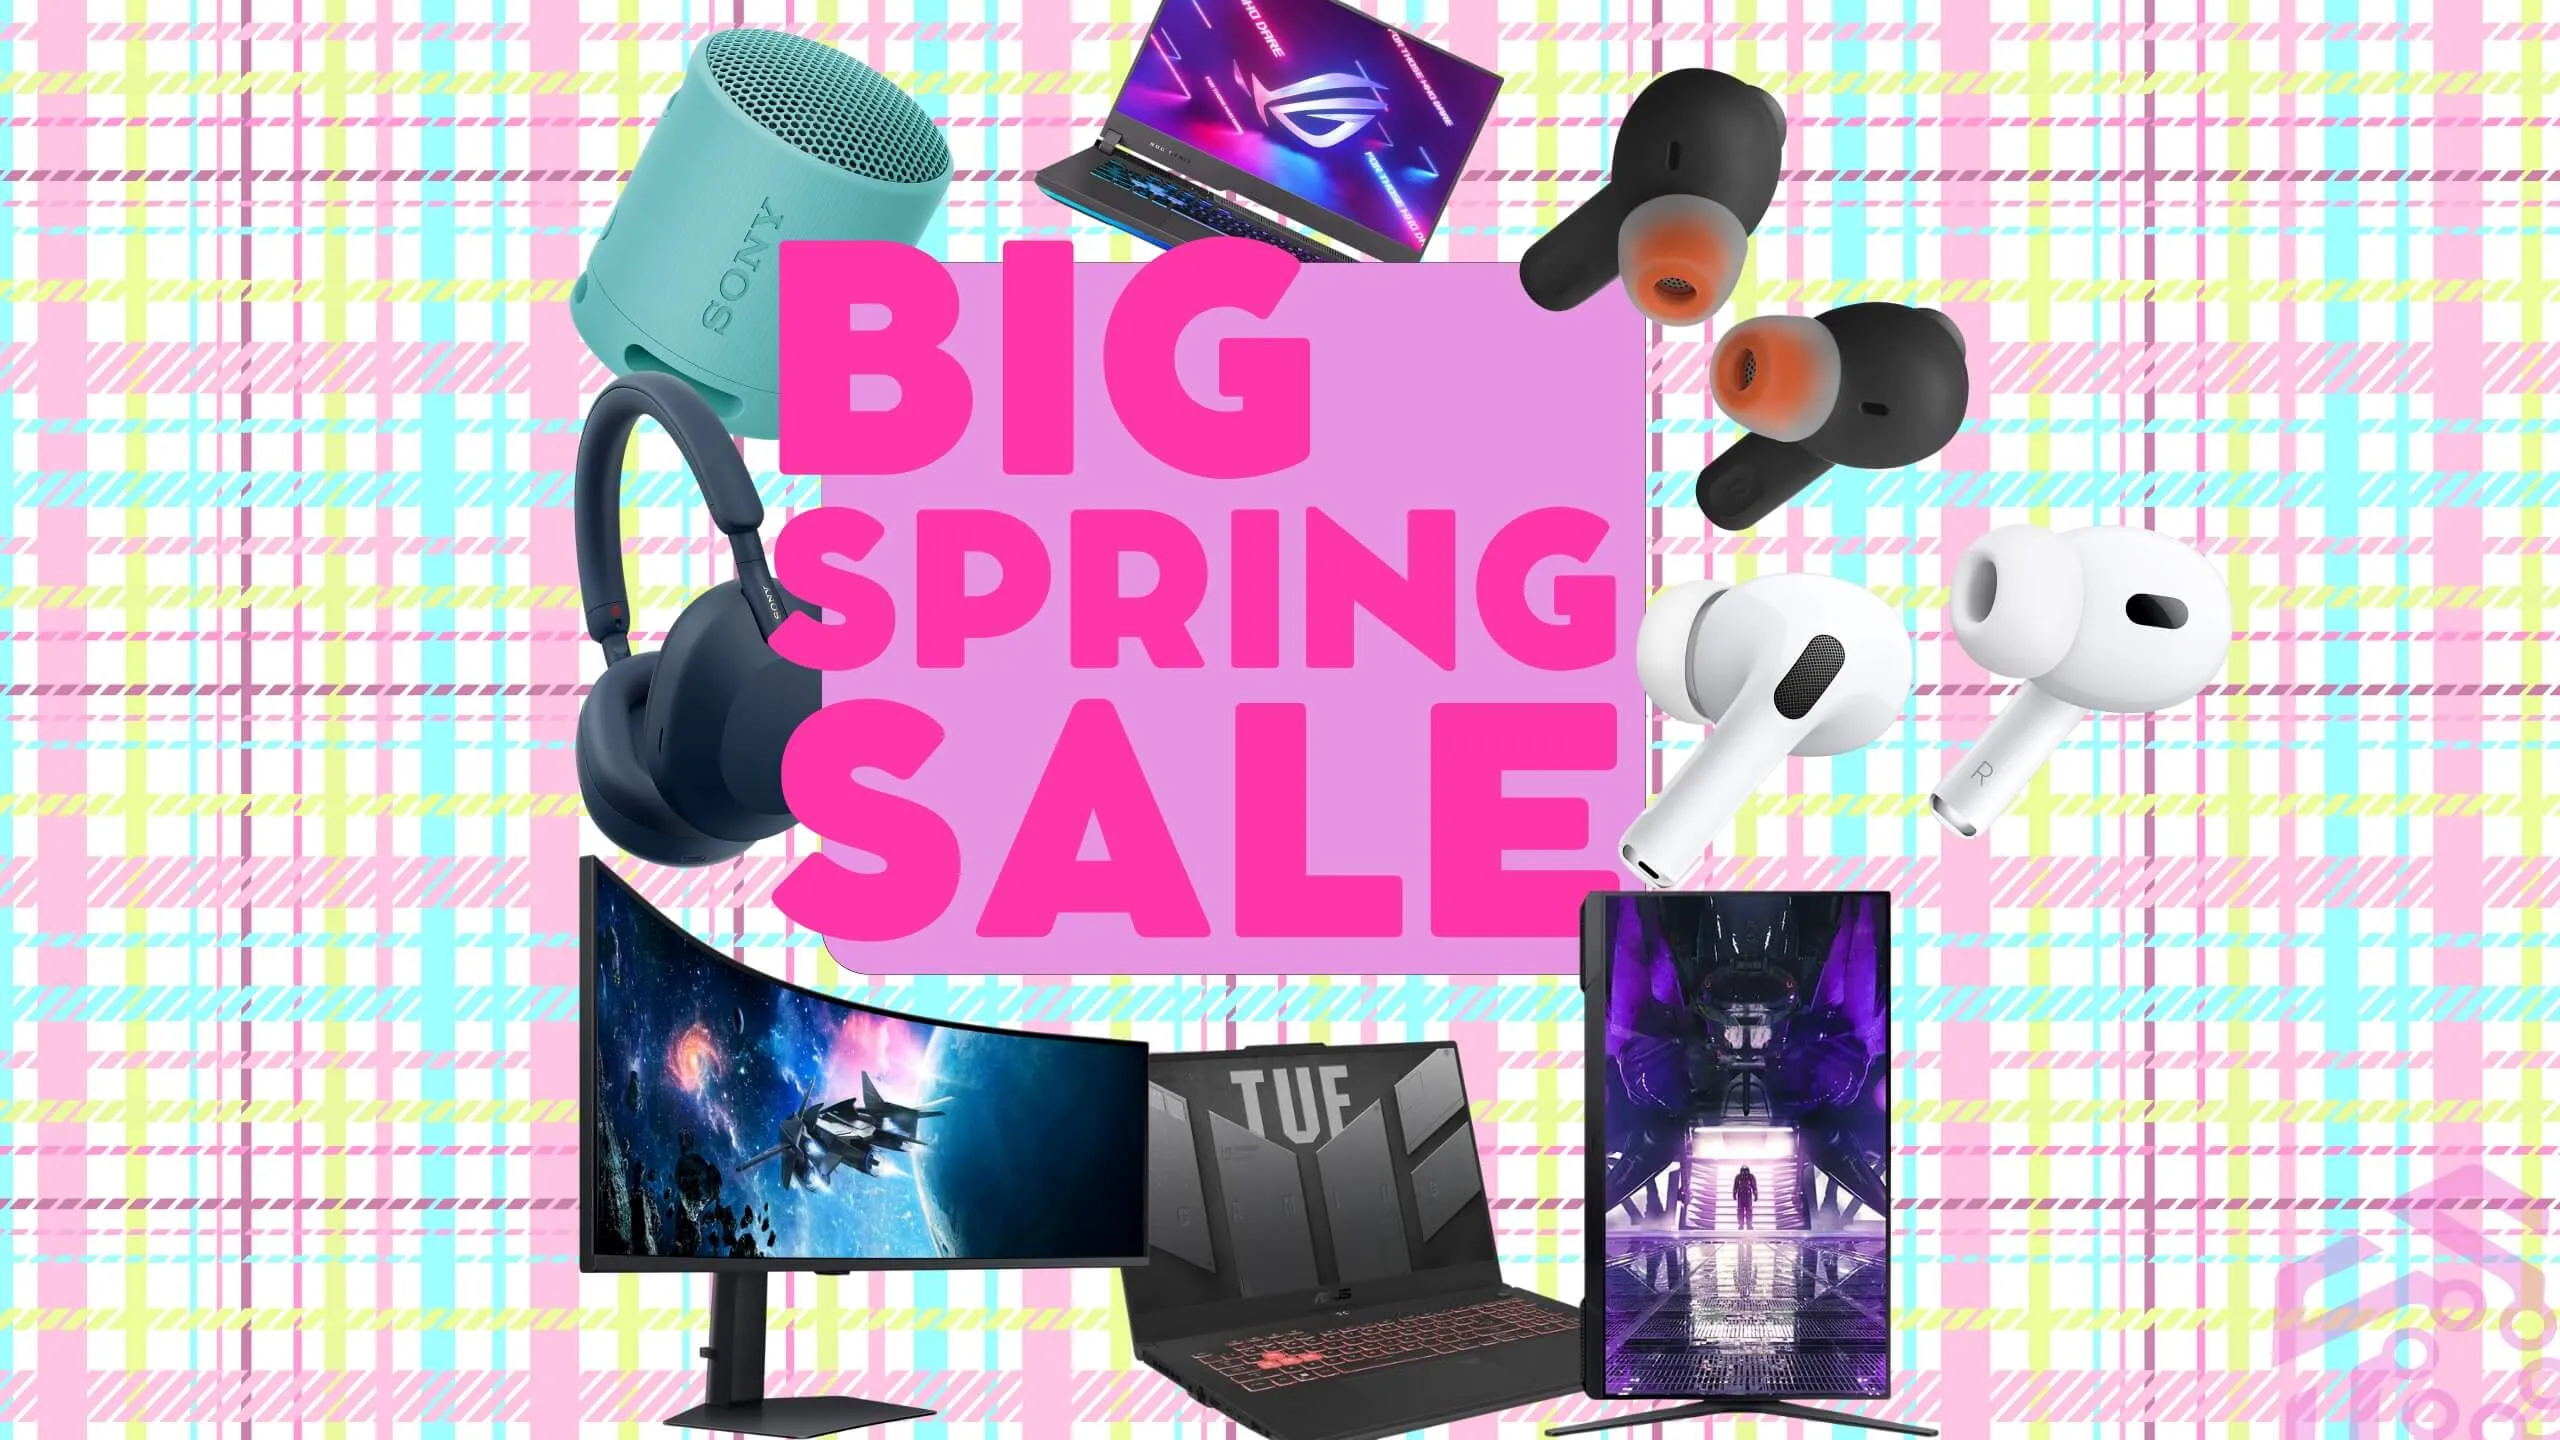 Big Spring Sale with Apple, Asus, Samsung, JBL, and Sony devices